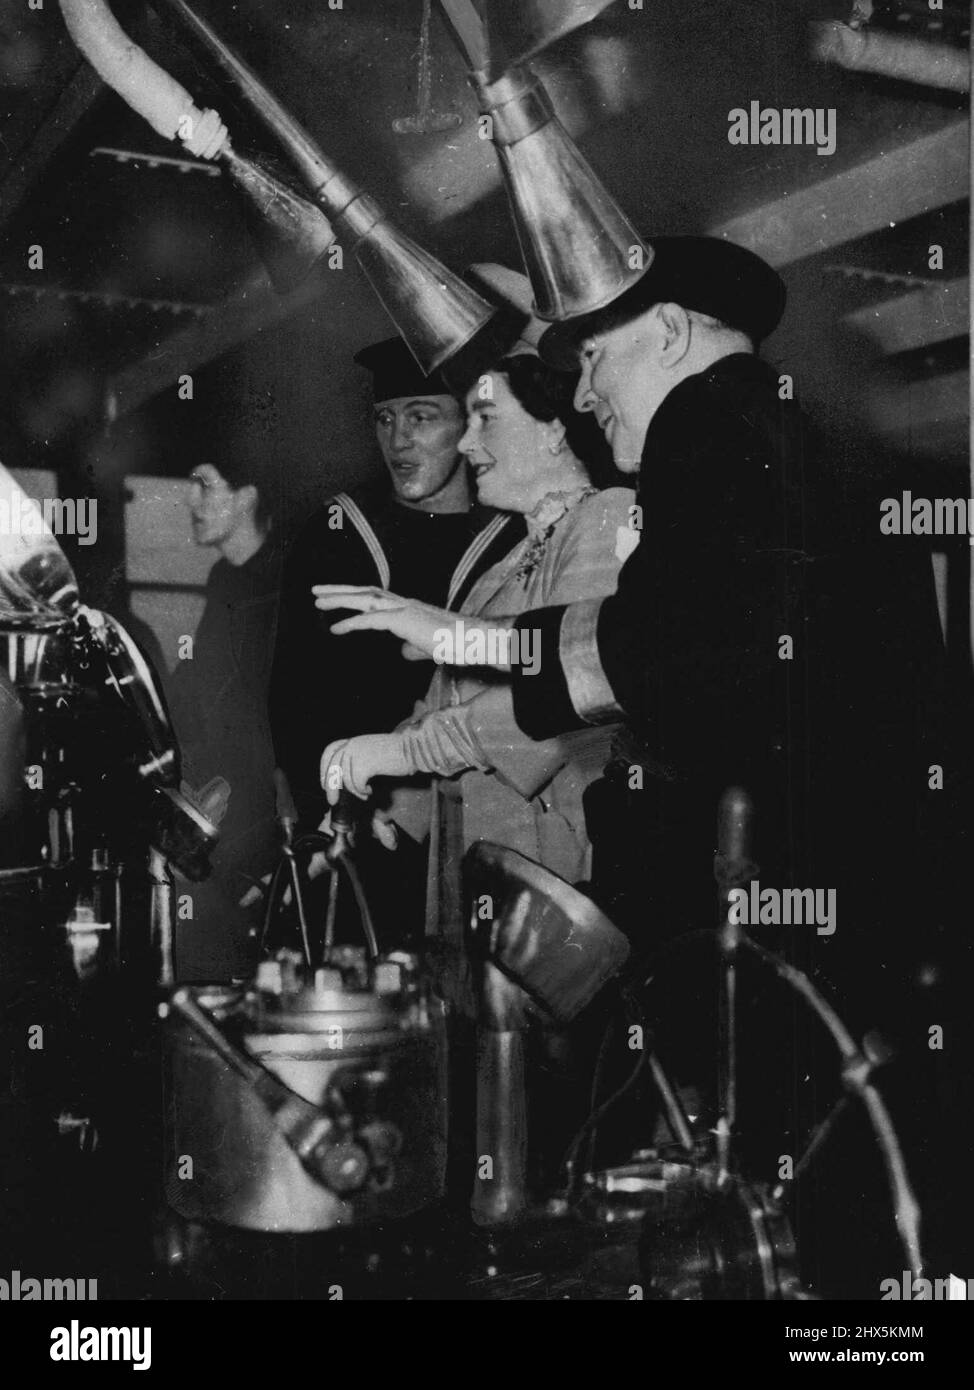 Queen Elizabeth Steers Her Name Ship -- This historic picture shows Her Majesty Queen Elizabeth steering her name ship, the gigantic liner 'Queen Elizabeth,' during the vessel's speed trials in the Firth of Forth, October, 1946. The Queen, advised by Commodore Sir James Bisset (nearest camera) relieving the Quartermaster at the wheel while the liner speed over the 'measured mile' at thirty knots. January 01, 1946. (Photo by Associated Press Photo). Stock Photo